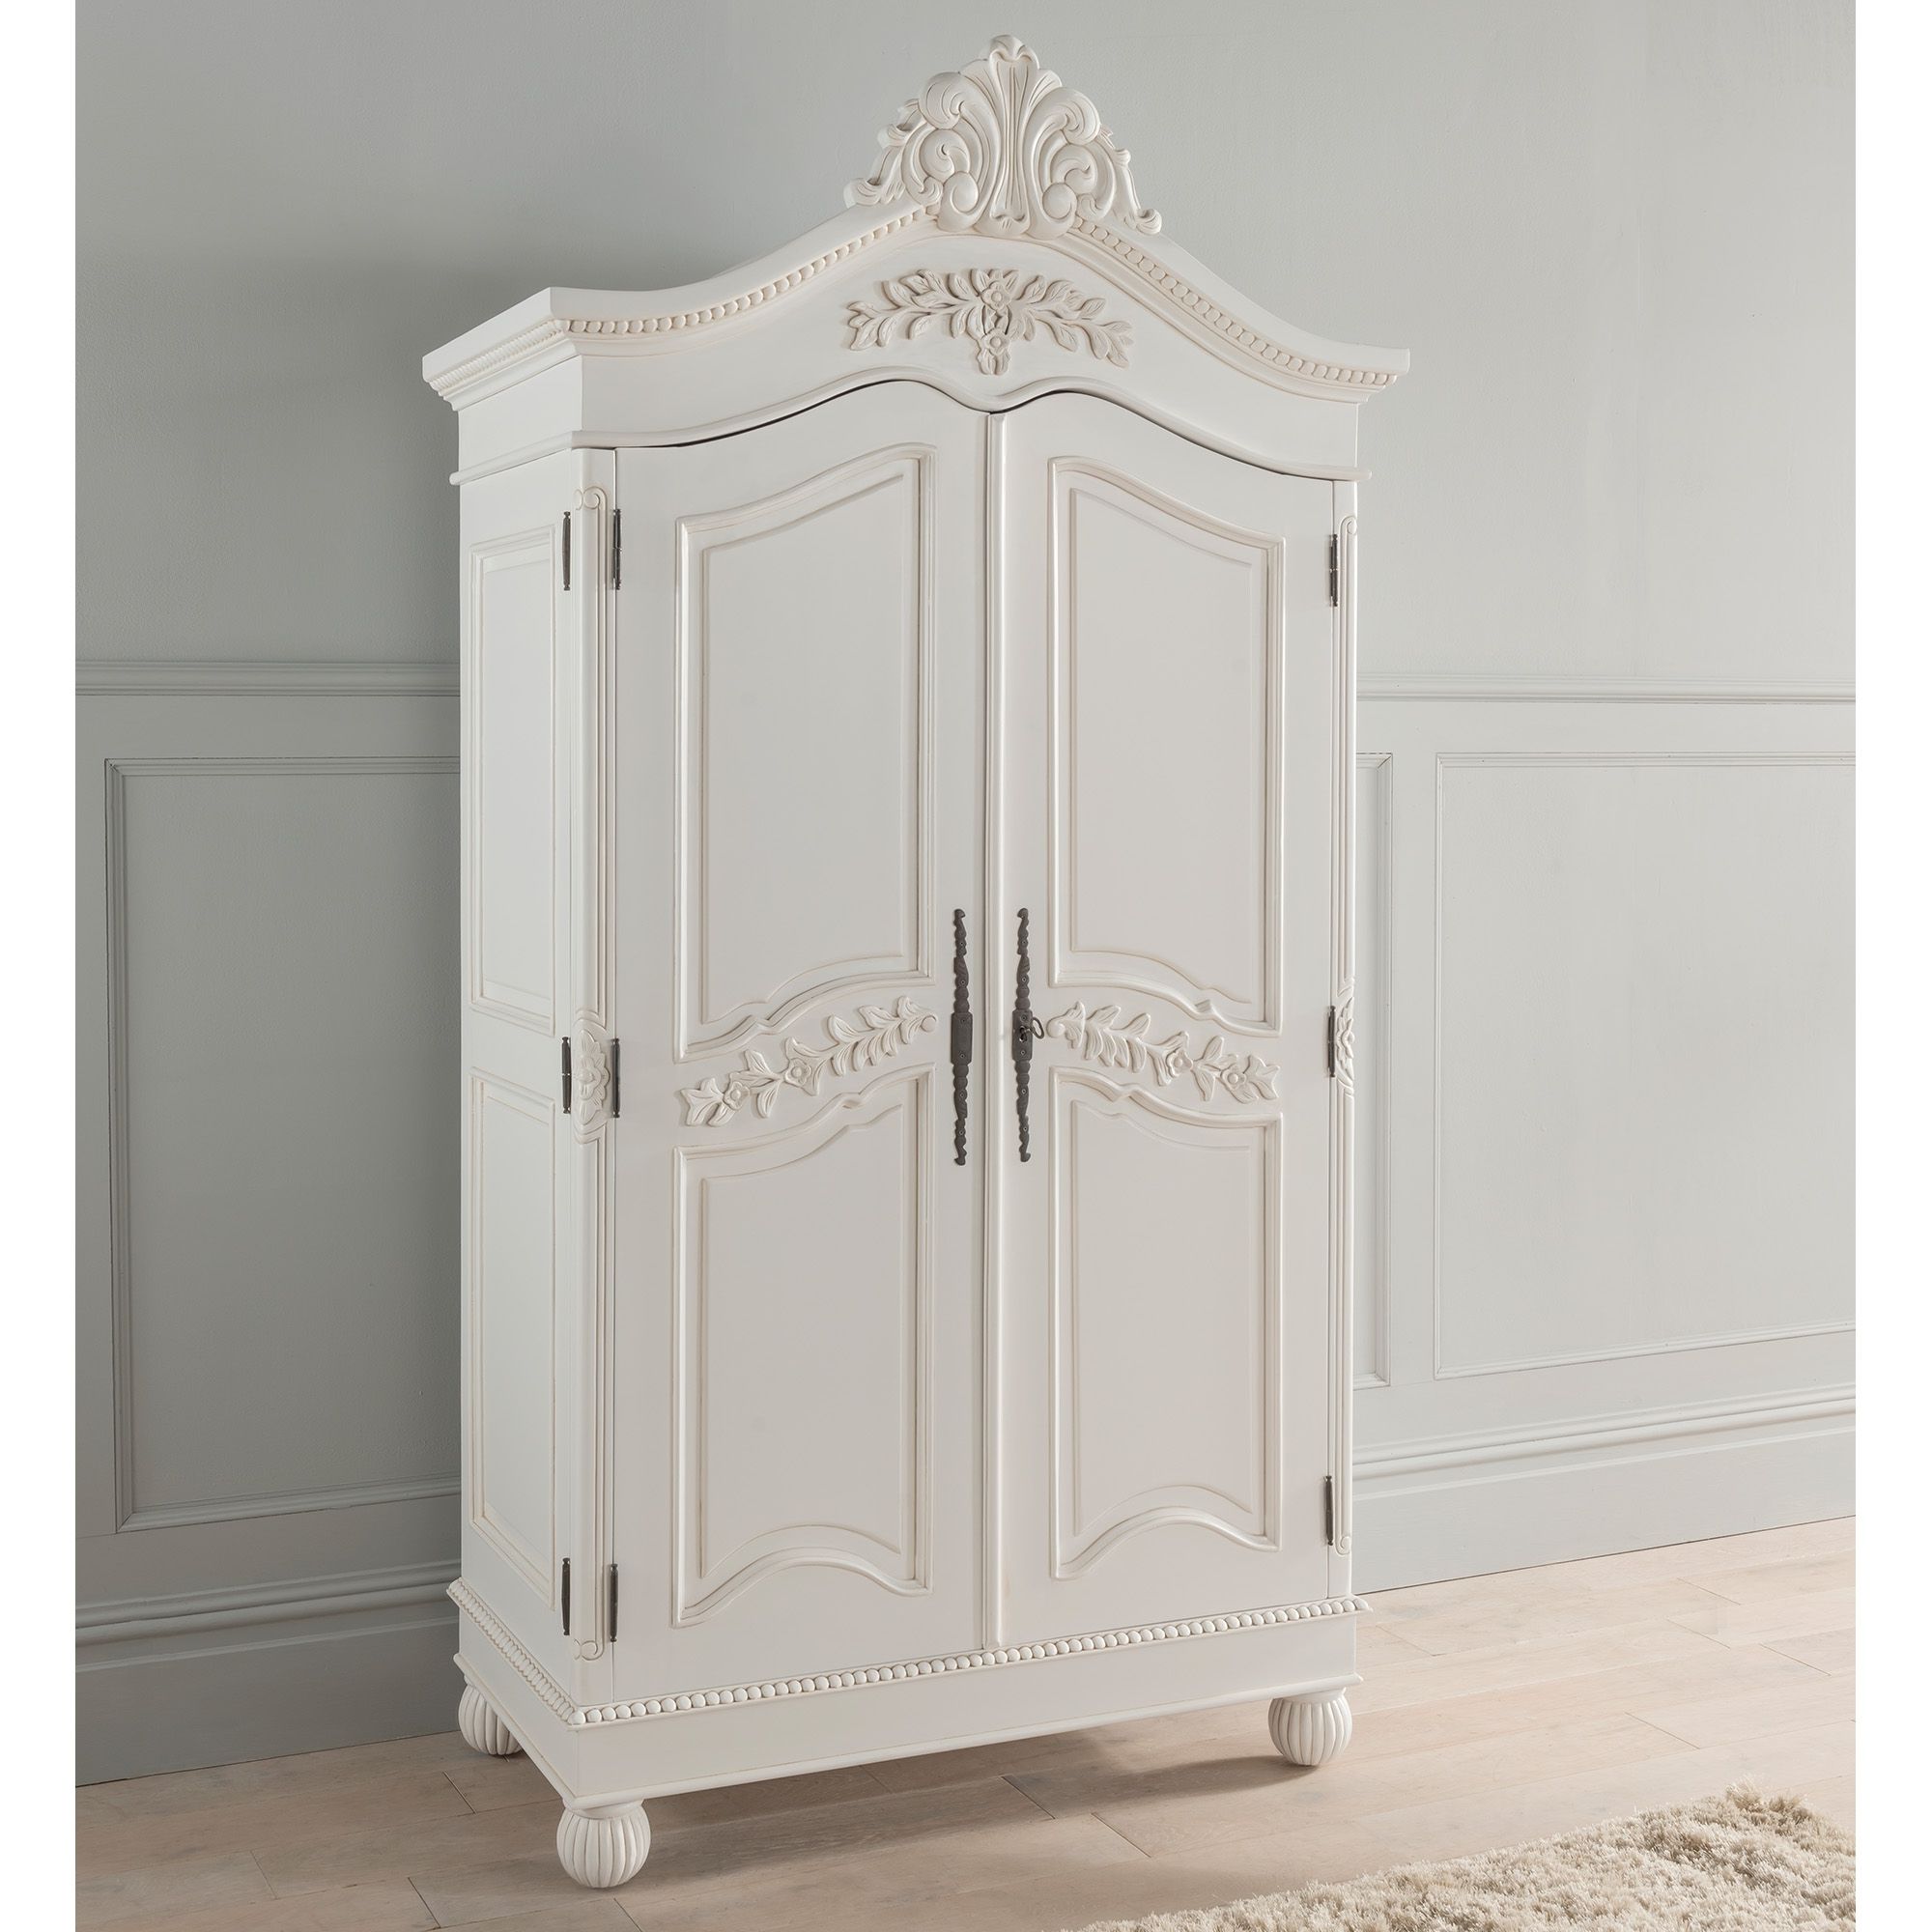 Antique French Style Wardrobe | Shabby Chic Bedroom Furniture Intended For Chic Wardrobes (Gallery 1 of 20)